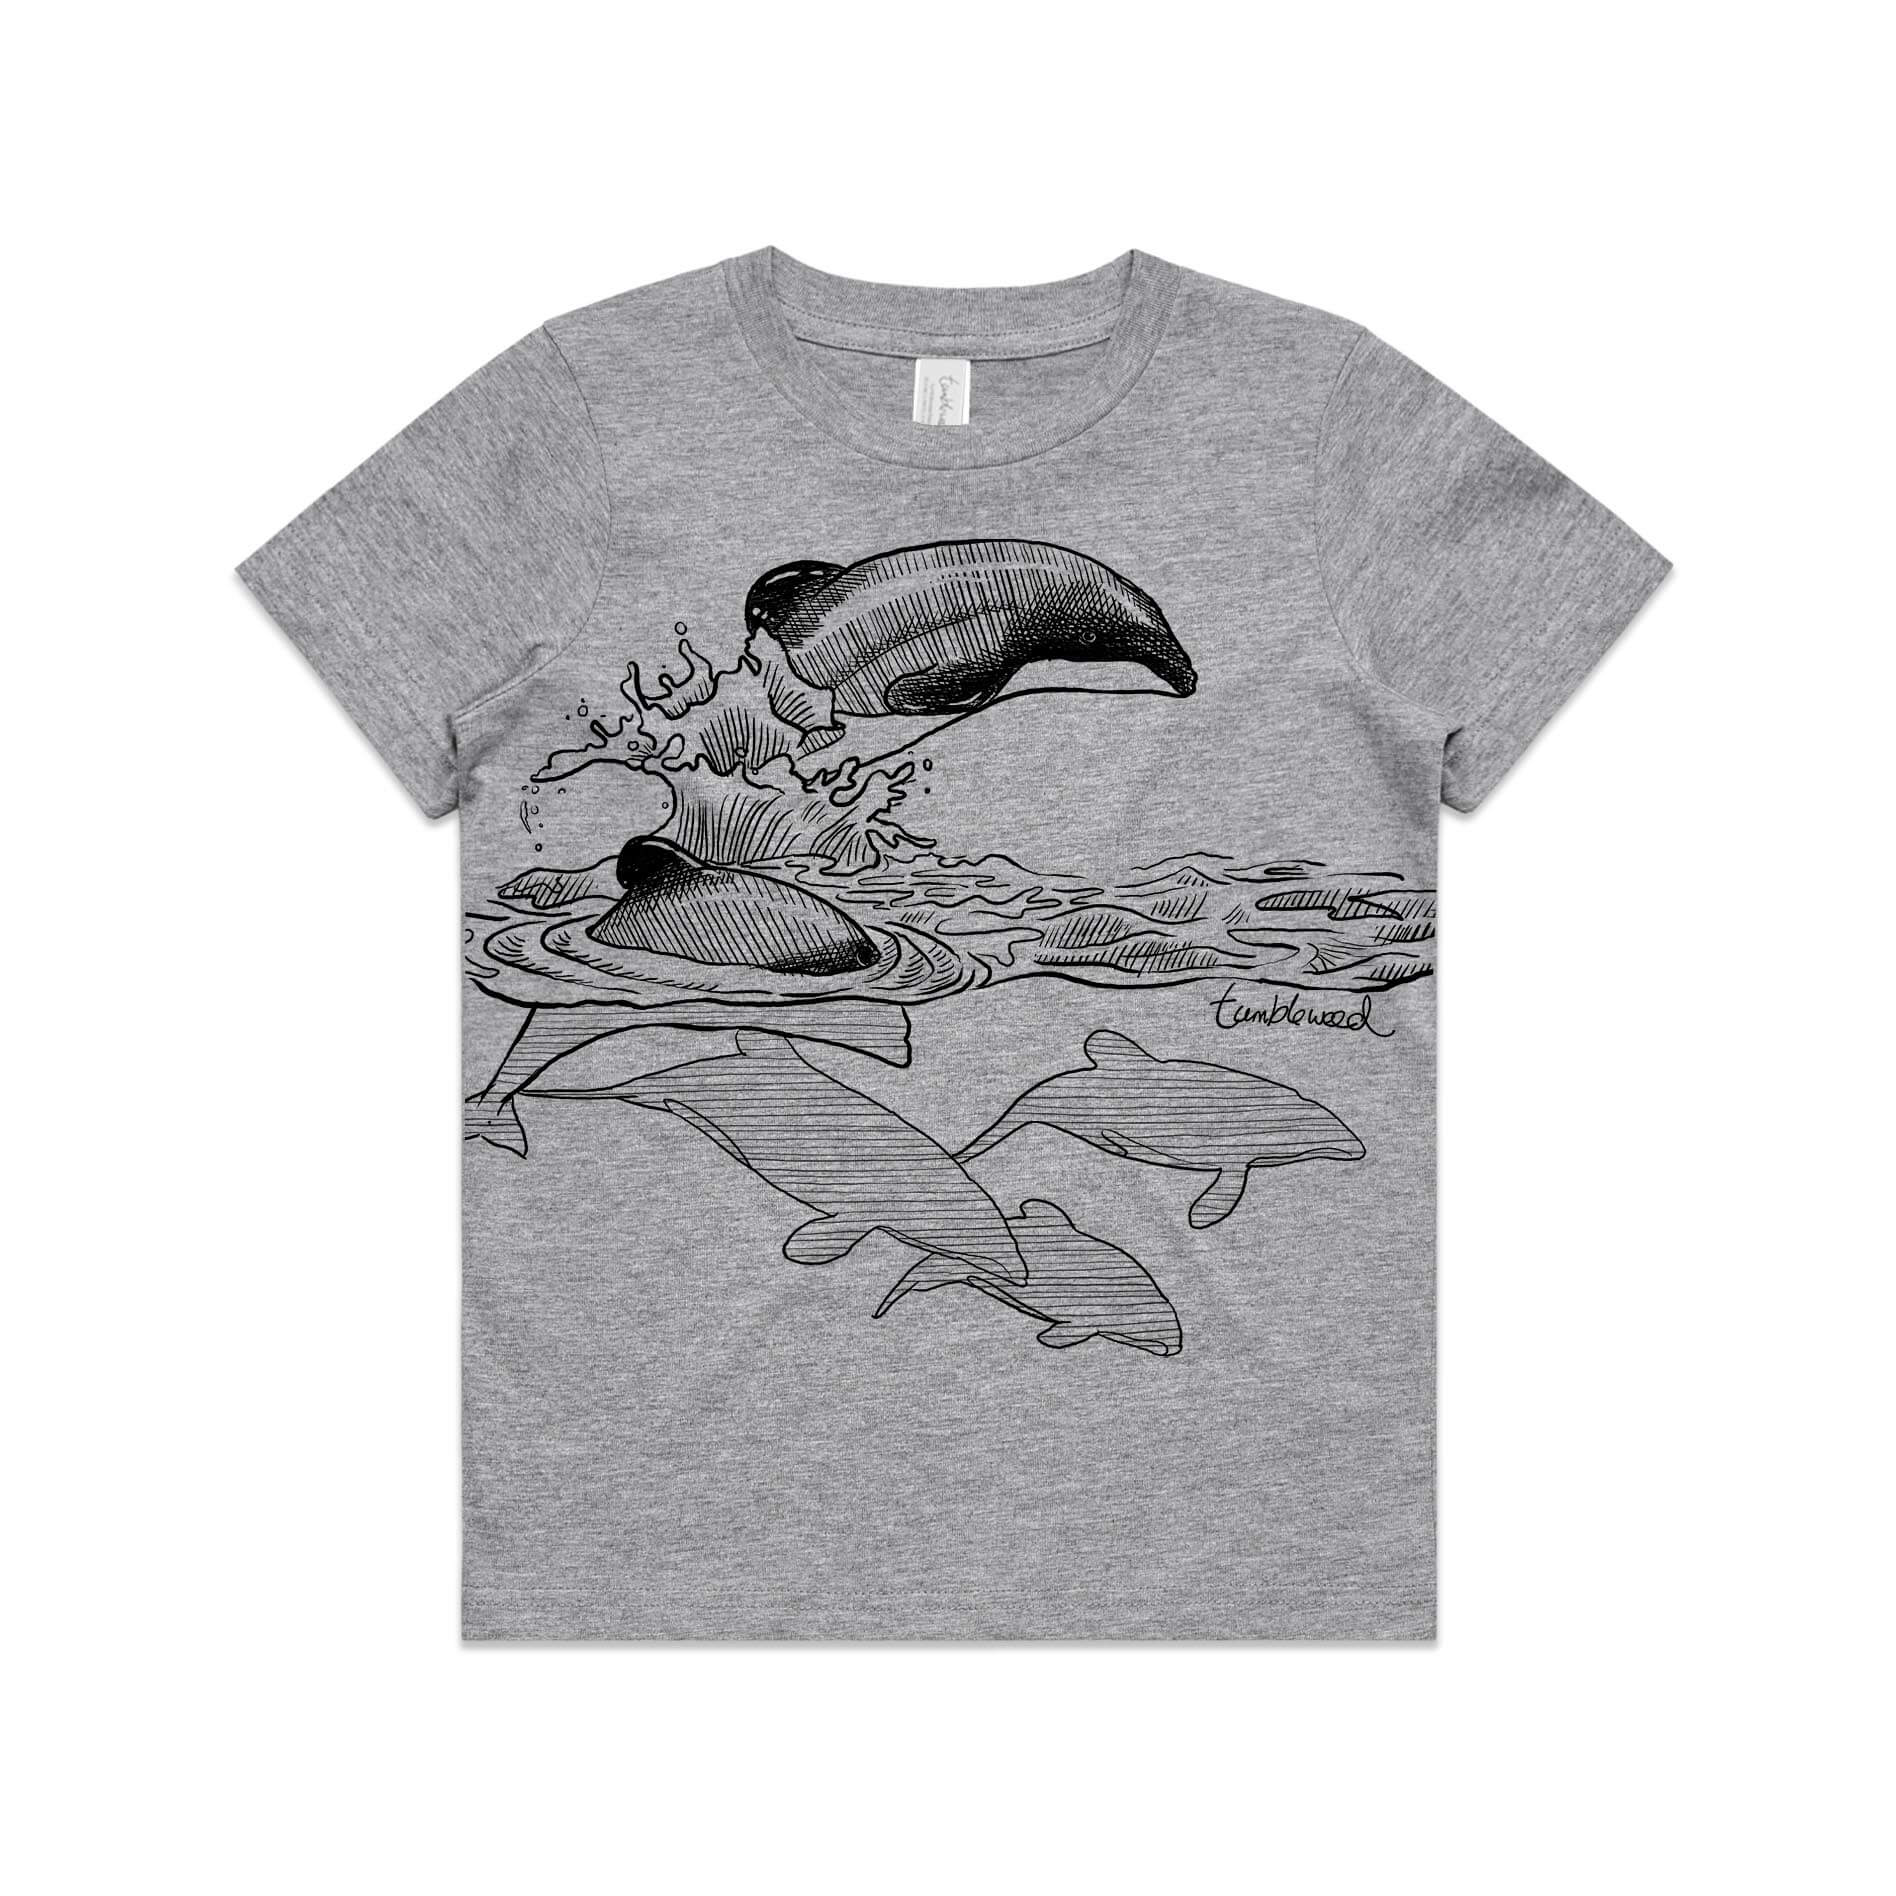 Grey marle, cotton kids' t-shirt with screen printed ducks maui dolphin design.